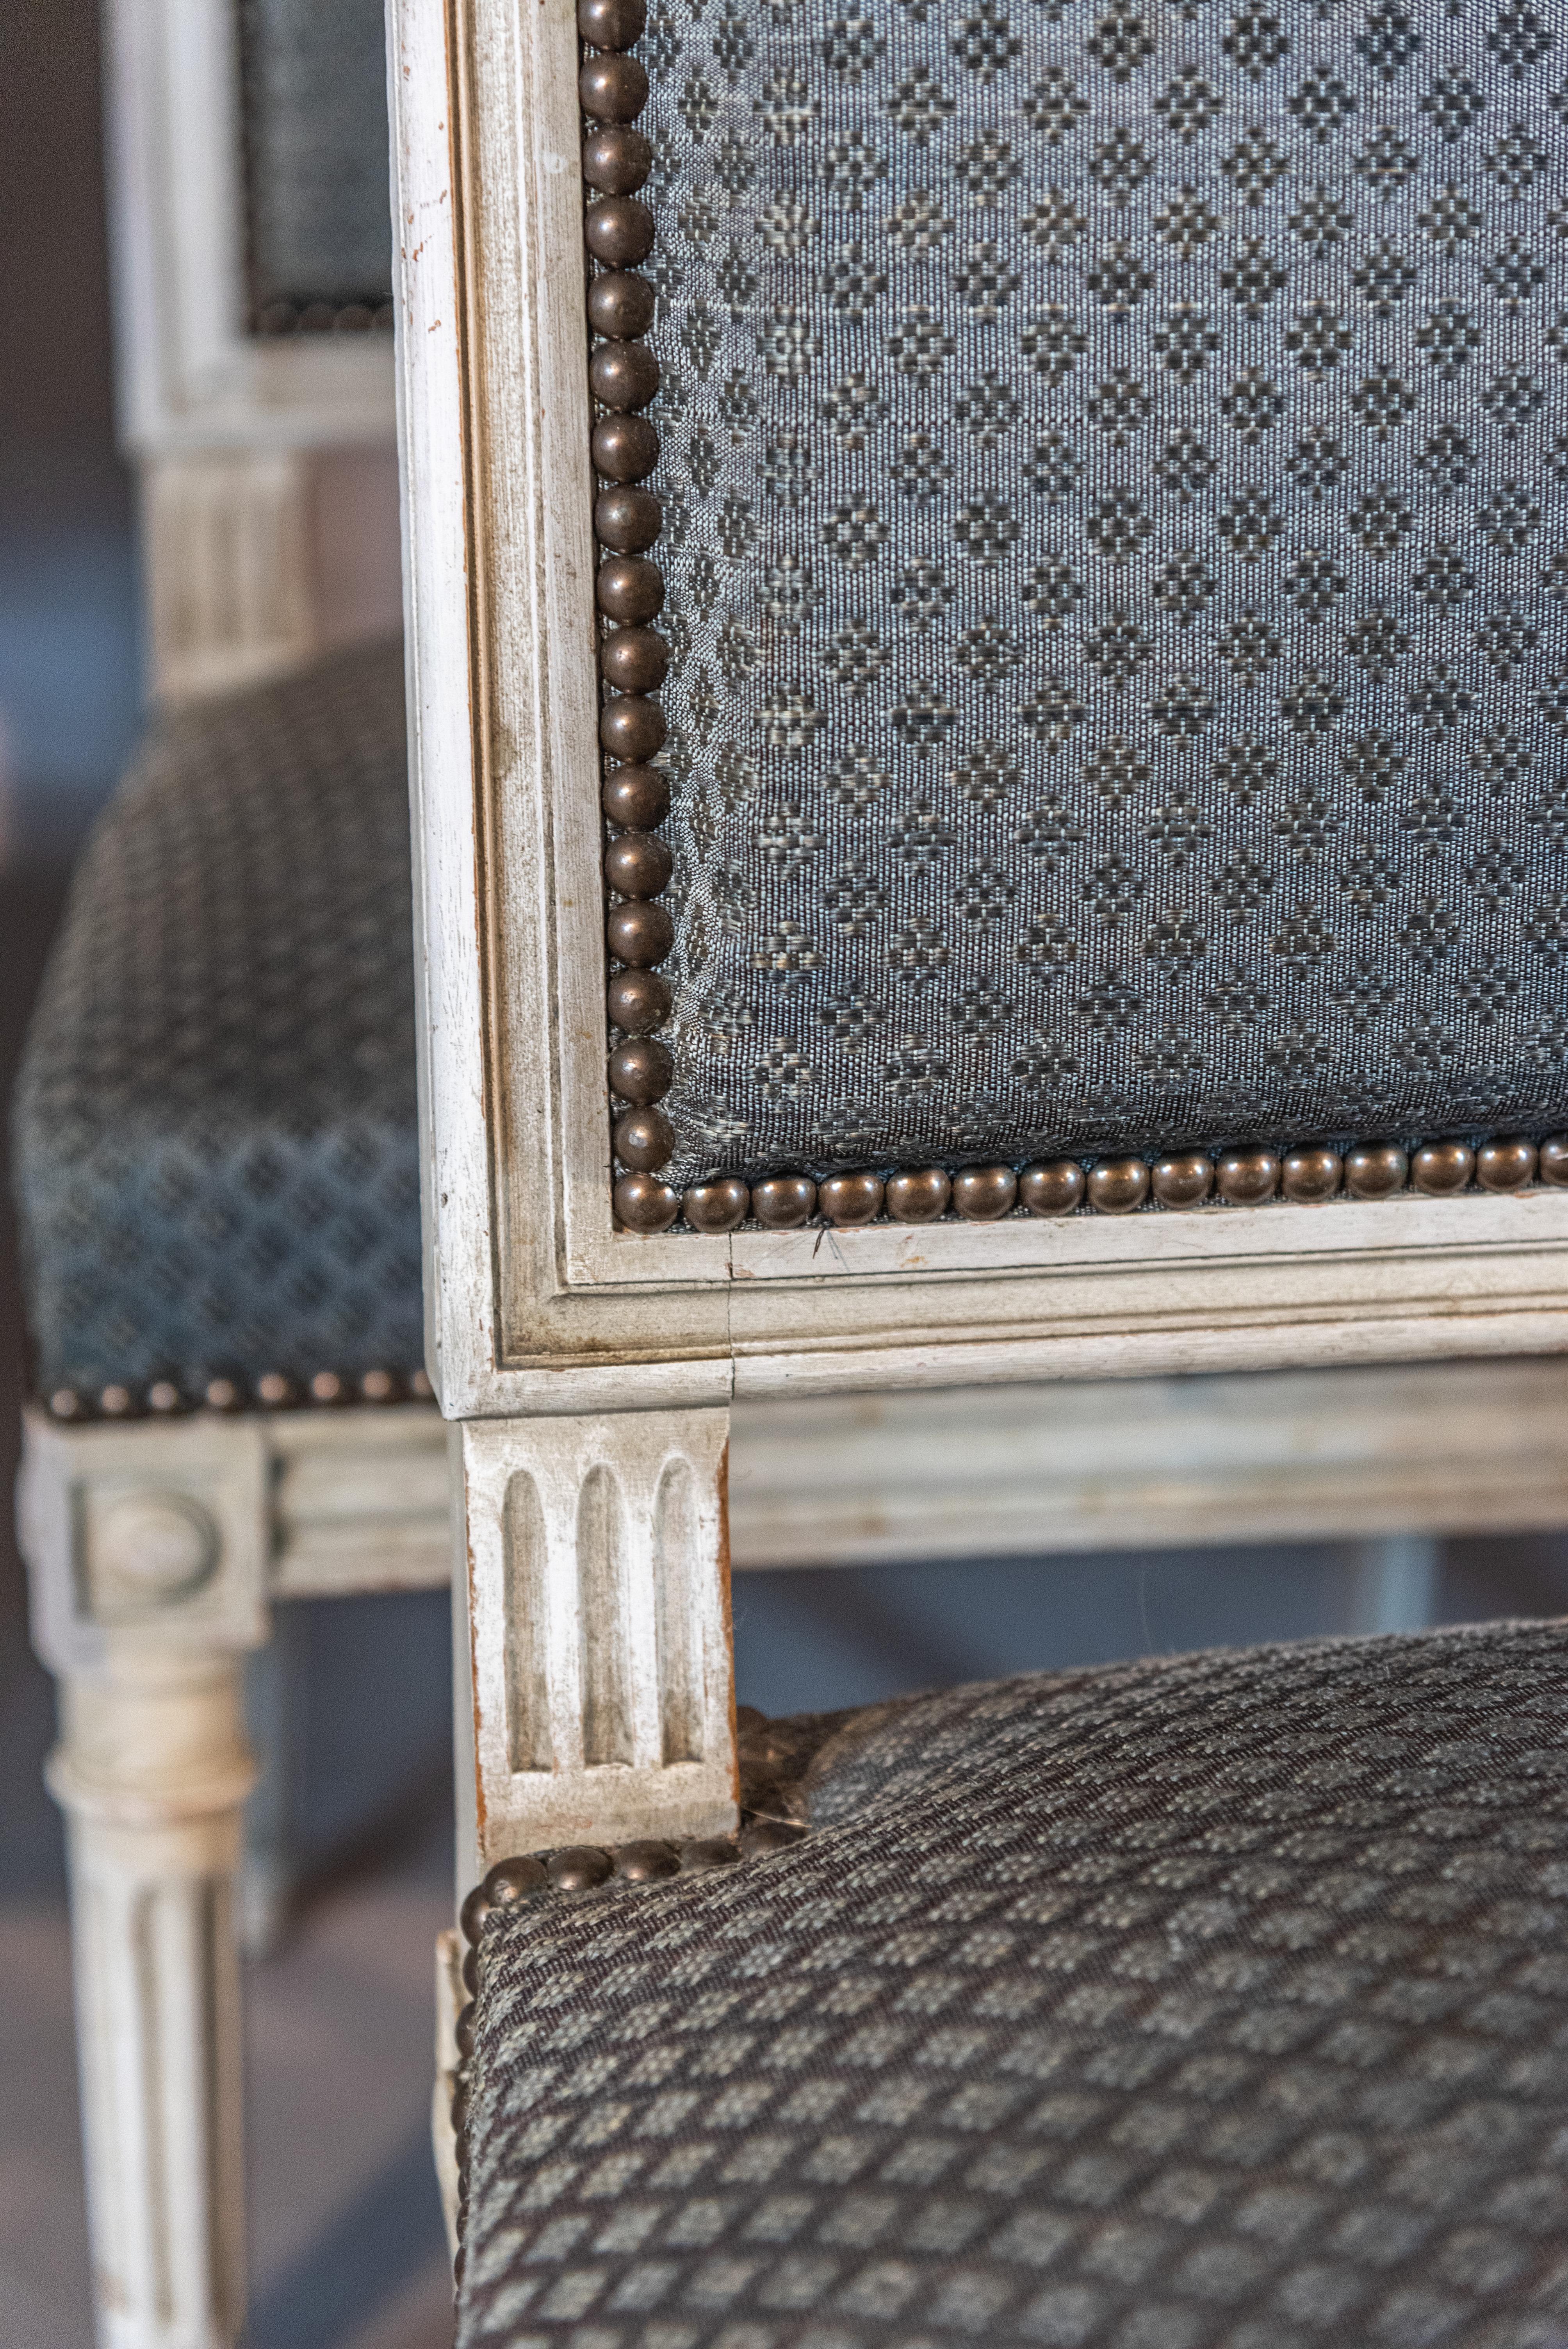 19th century. With their timeless design and luxurious materials, these chairs exude sophistication and elegance, adding a touch of refined beauty to any interior decor.

The Louis XVI style, named after the 18th-century French monarch, is